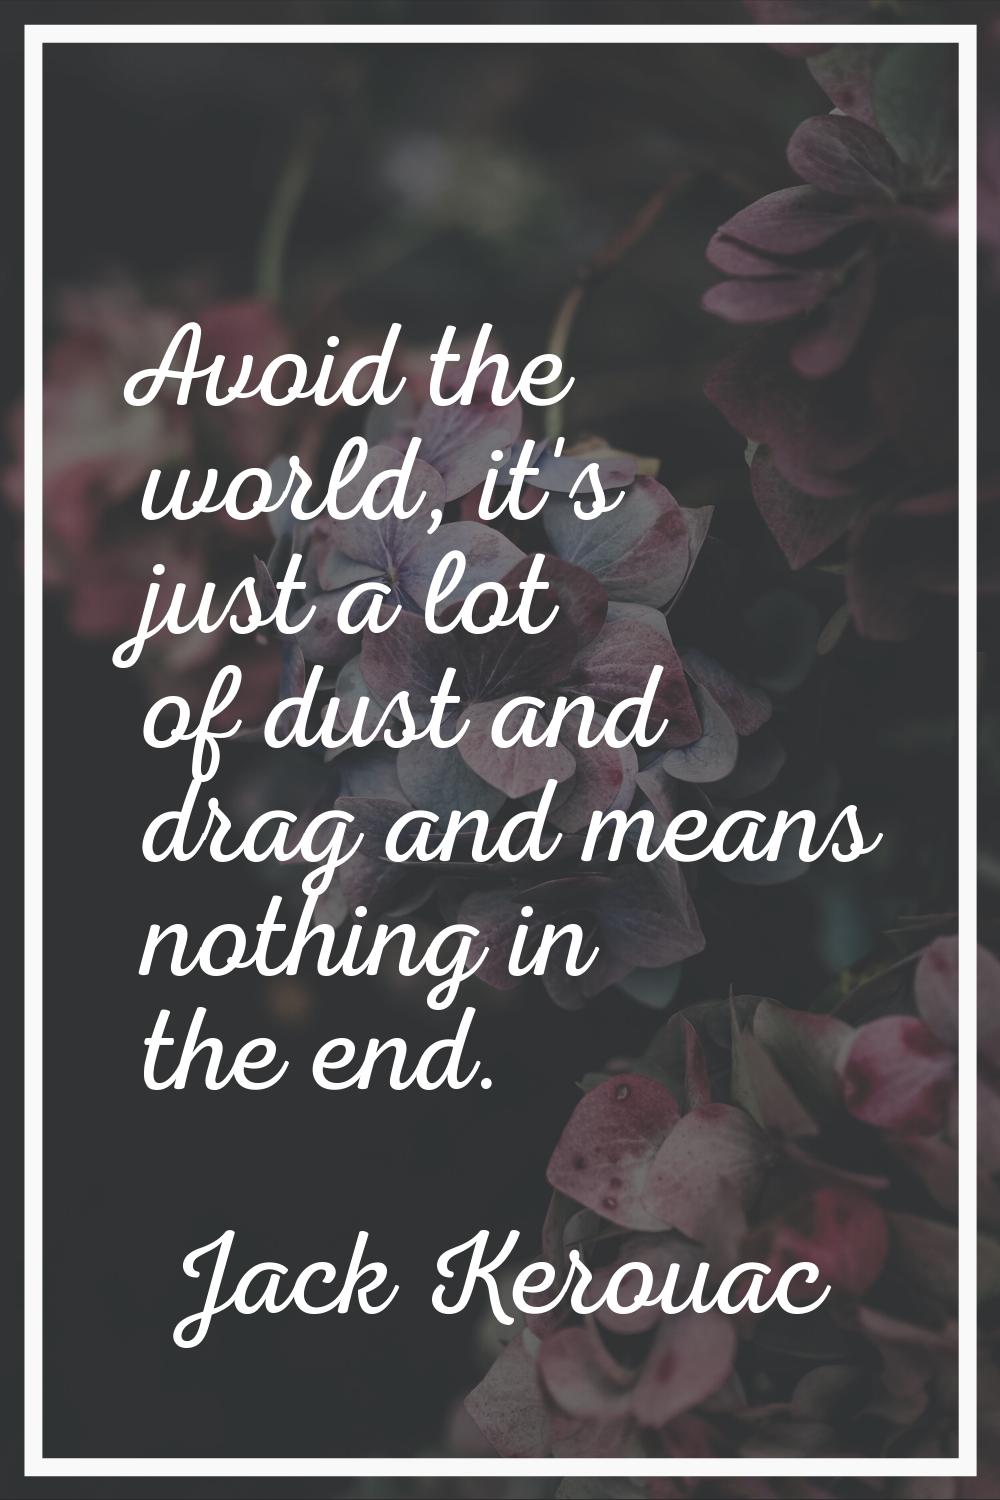 Avoid the world, it's just a lot of dust and drag and means nothing in the end.